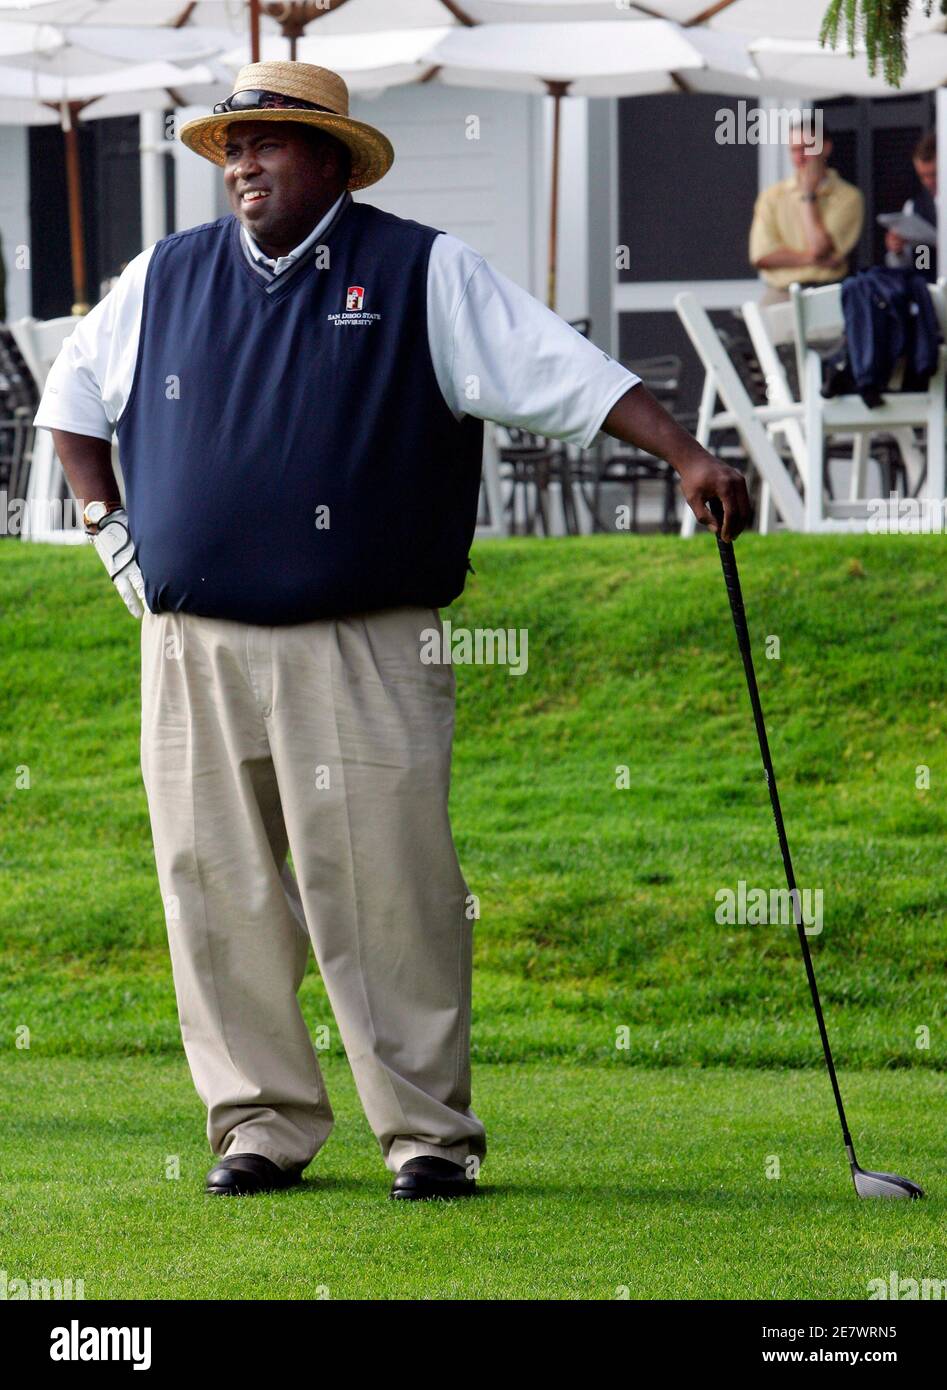 Former San Diego Padre Tony Gwynn waits to tee off during the National Baseball Hall of Fame golf tournament at the Leatherstocking golf club in Cooperstown, New York July 28, 2007. Gwynn and former Baltimore Oriole Cal Ripken Jr. will be inducted into the National Baseball Hall of Fame July 29.   REUTERS/Mike Segar (UNITED STATES) Stock Photo